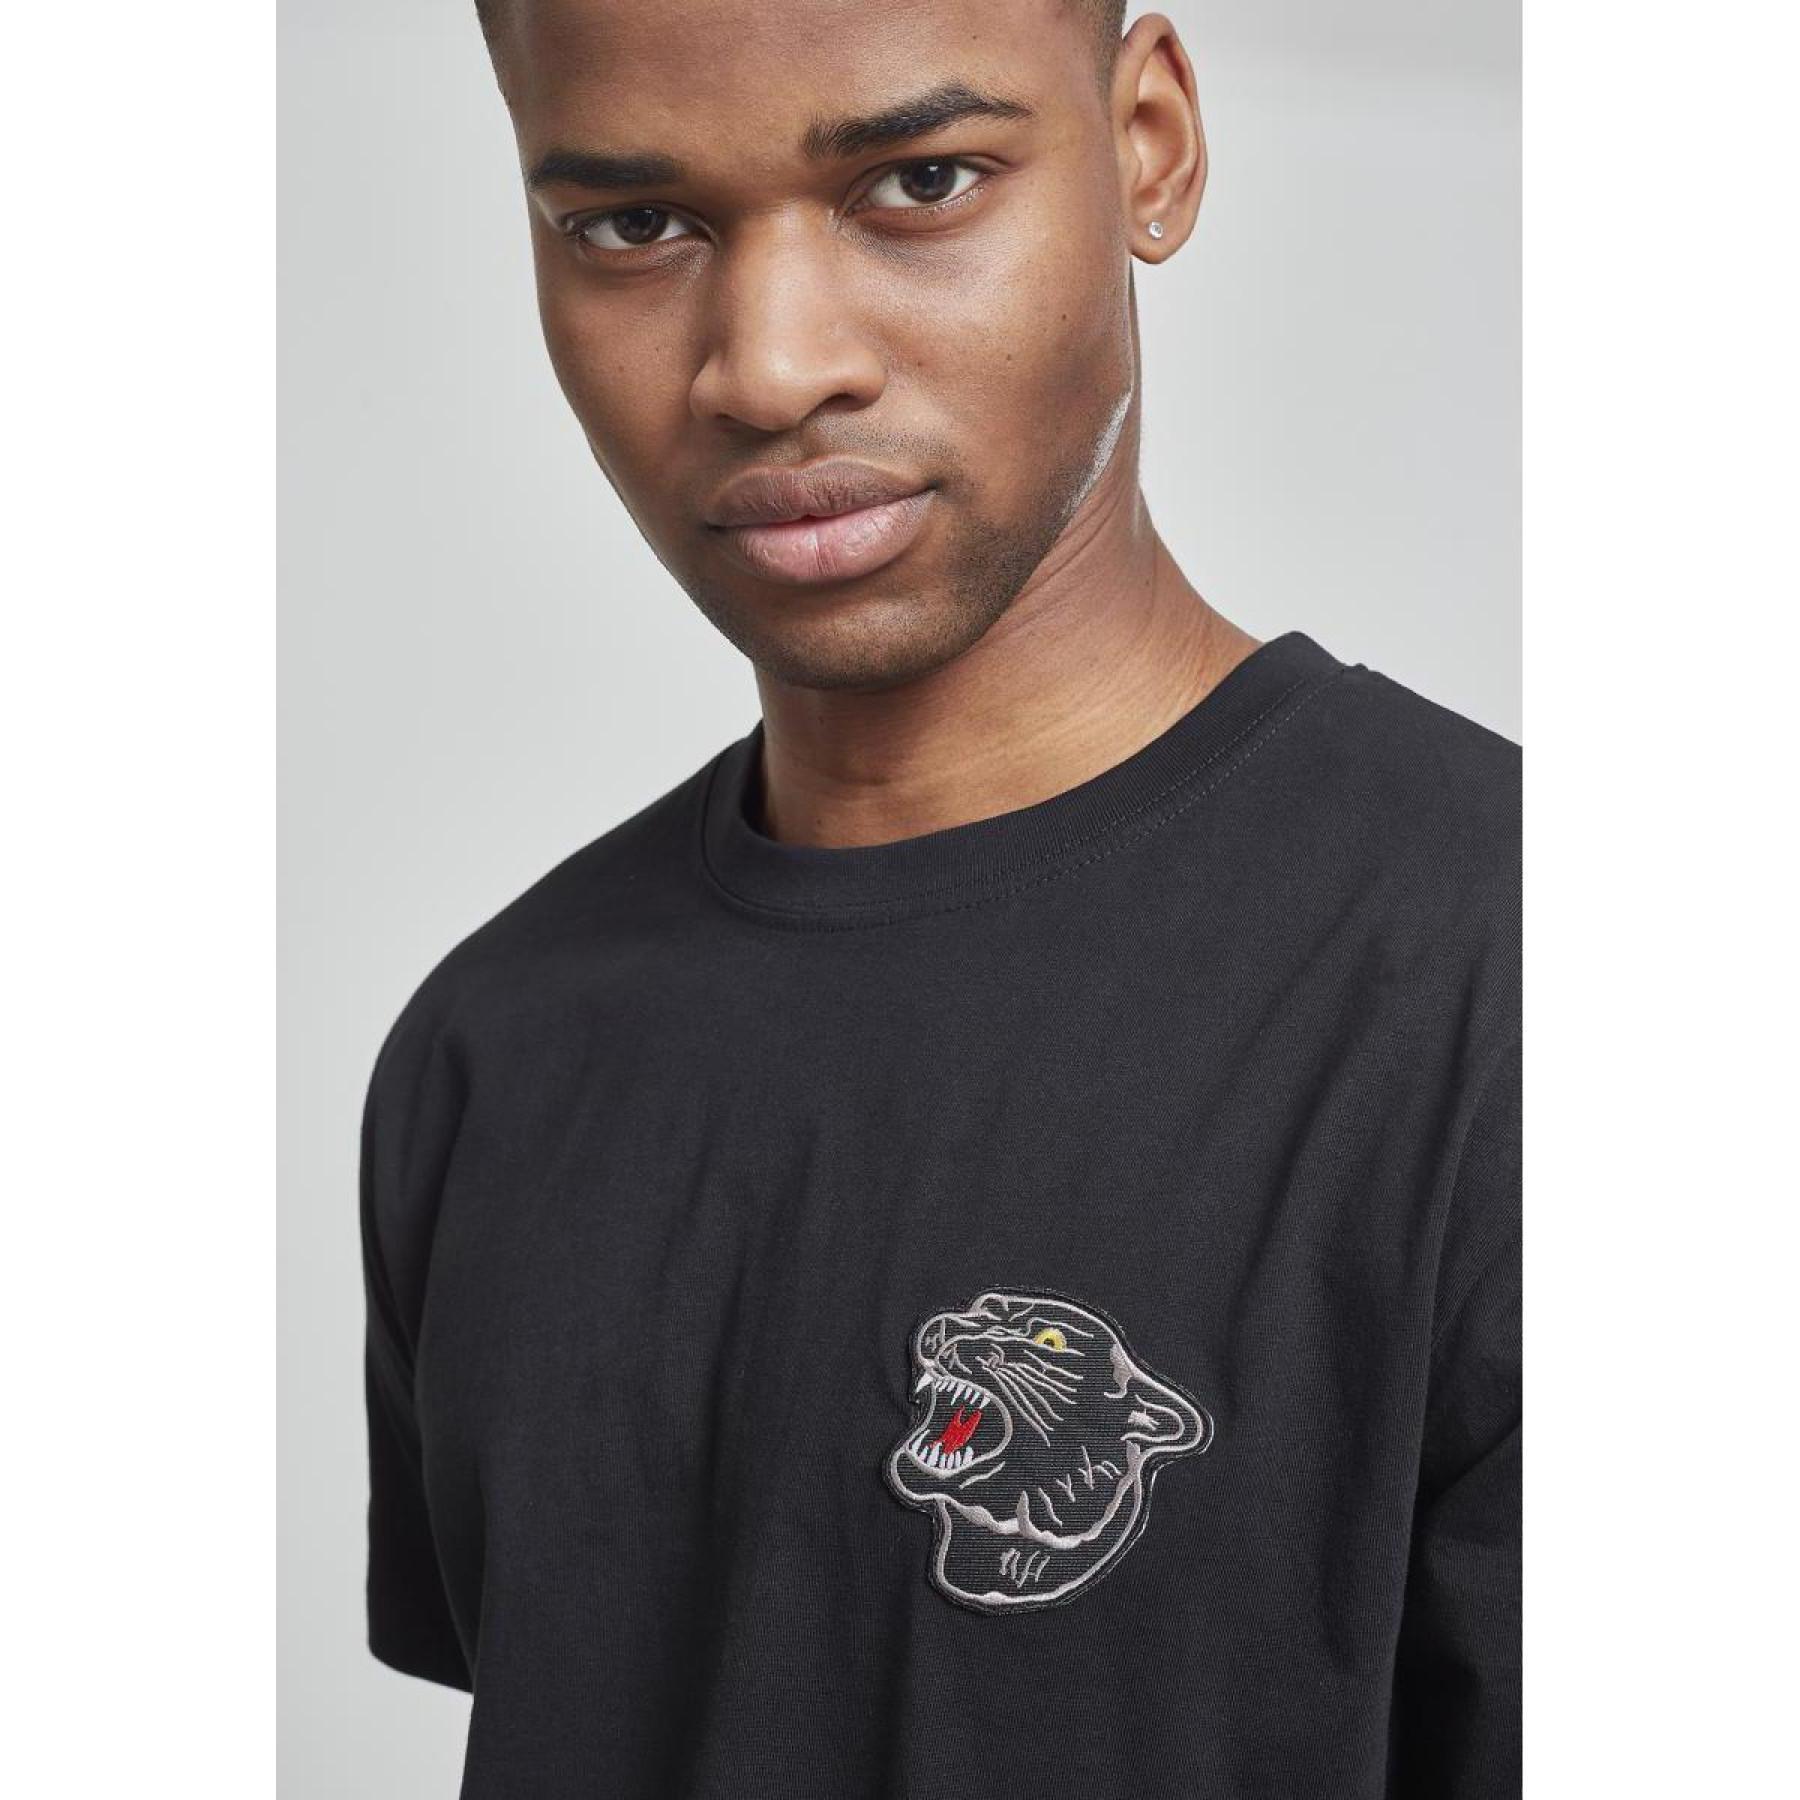 T-shirt Mister Tee basic Embroidered panther